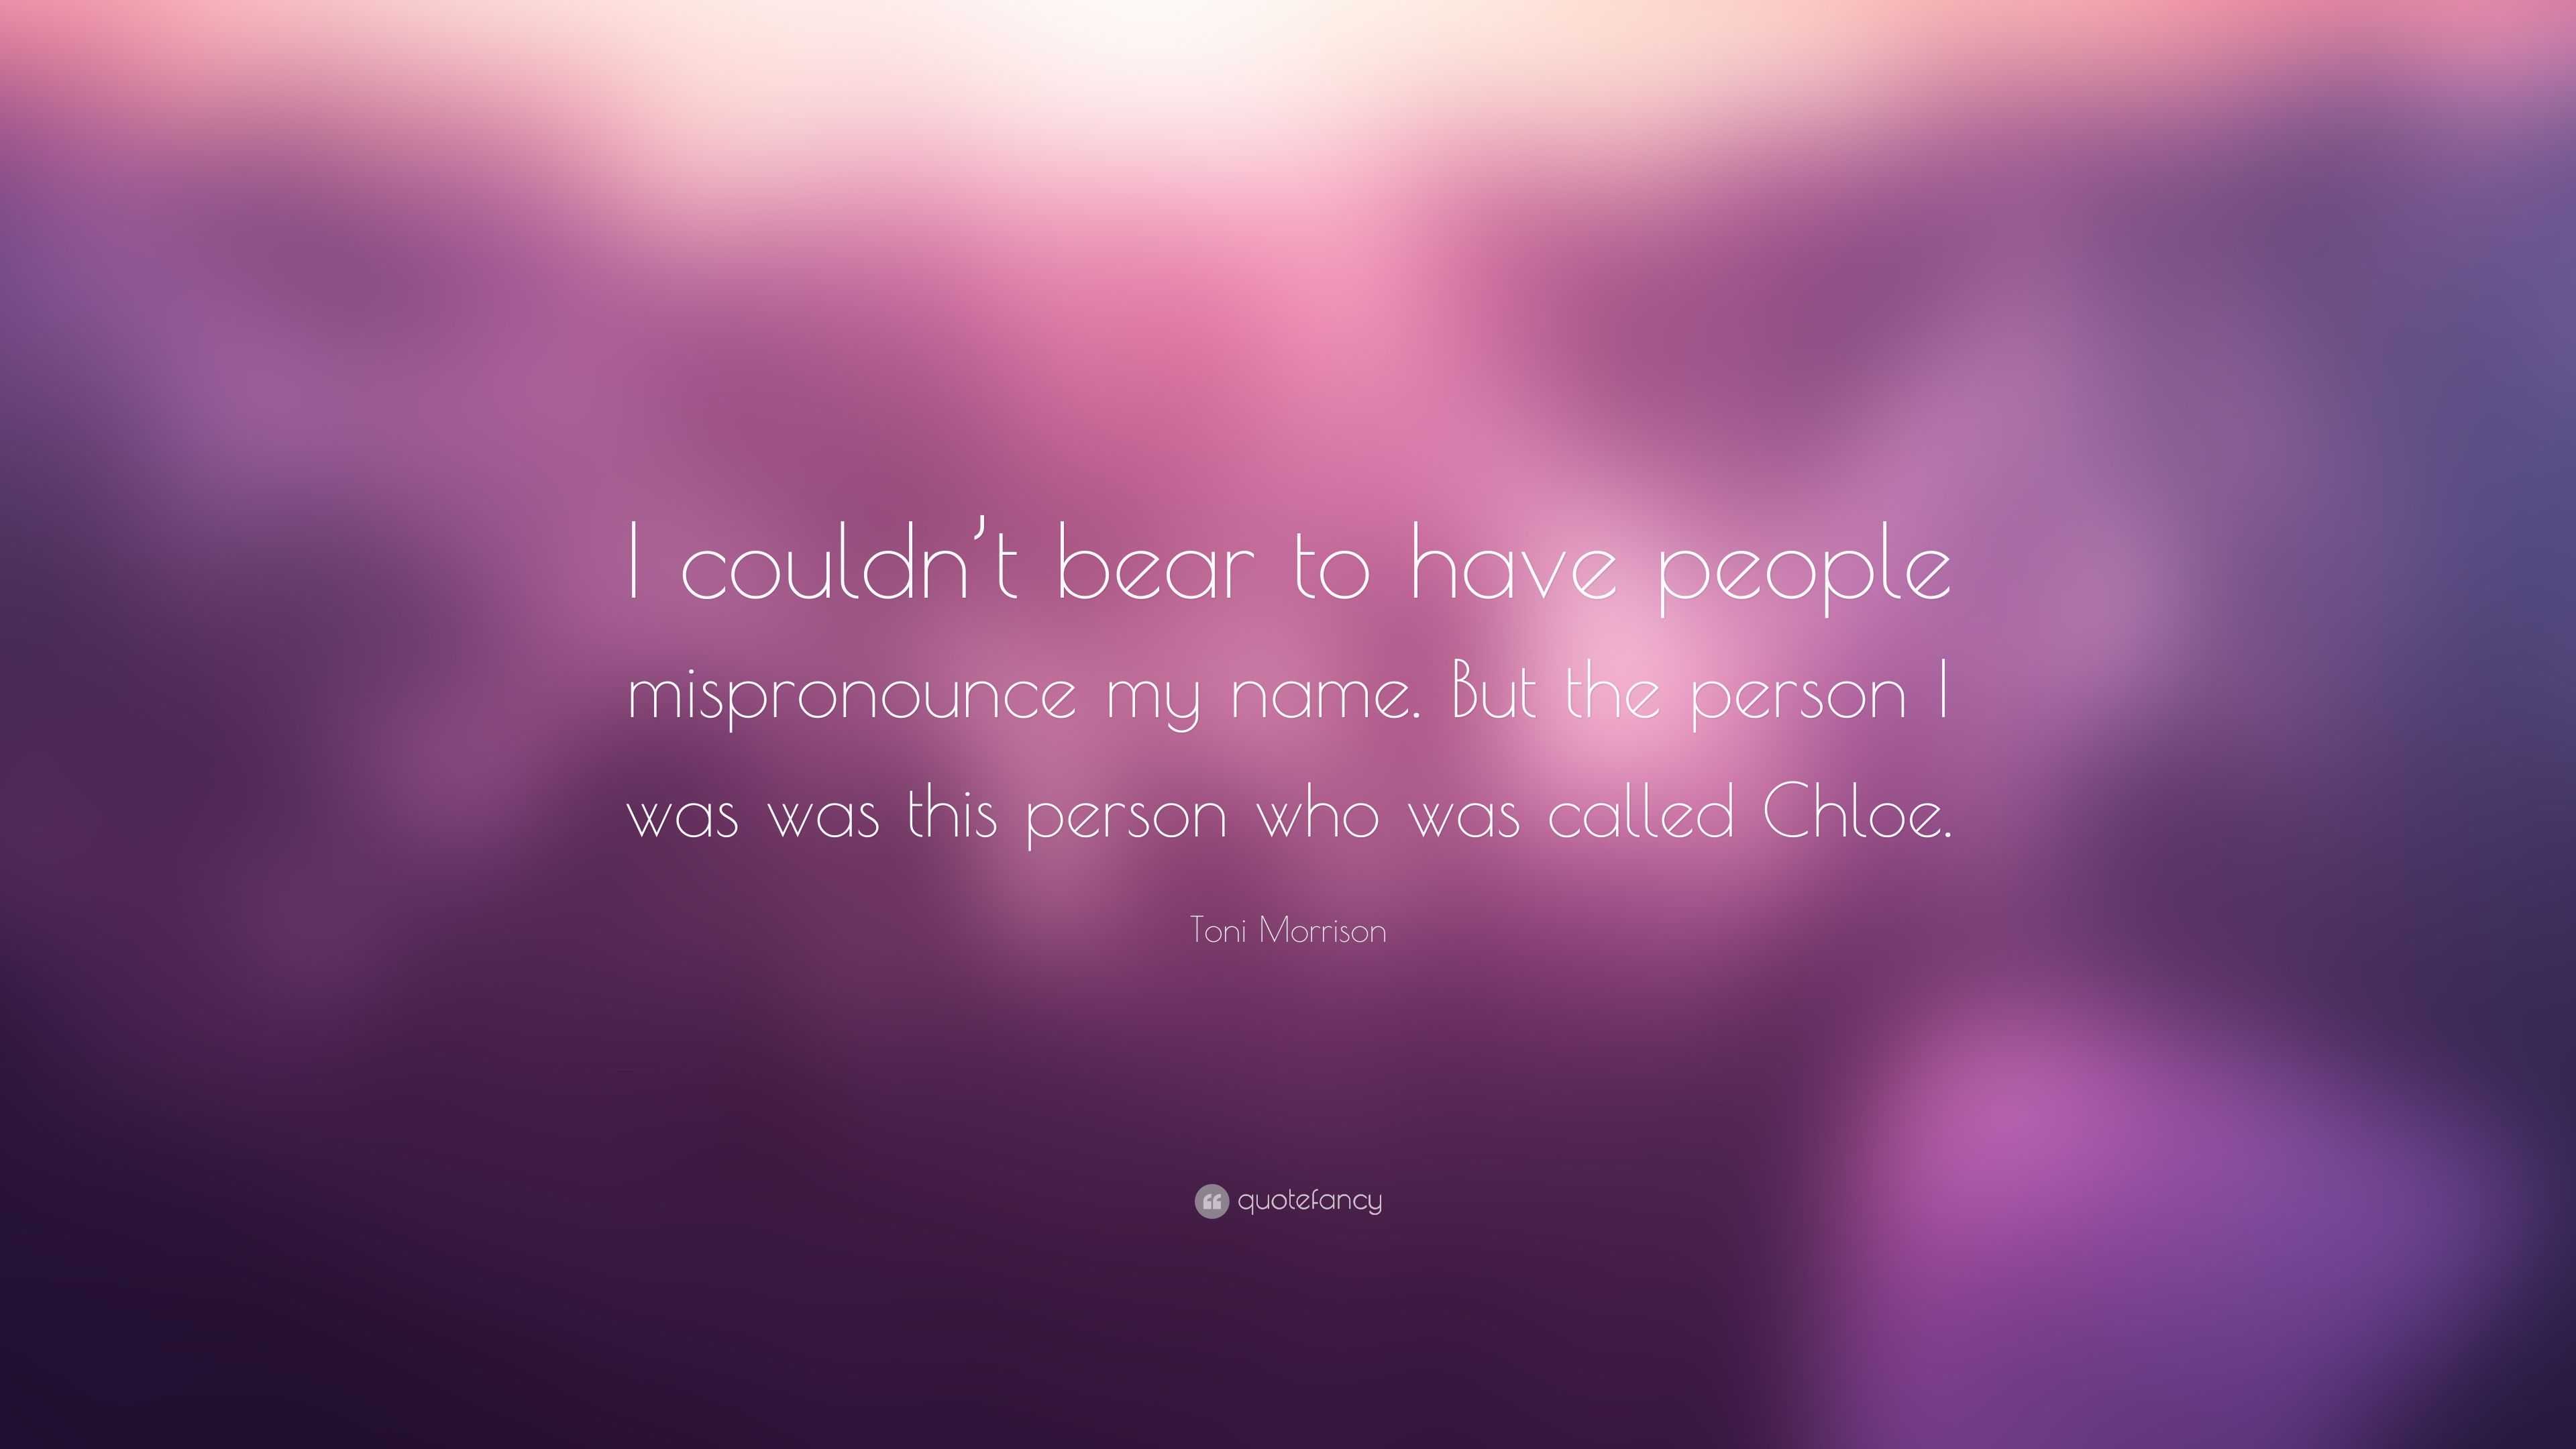 Toni Morrison Quote: “I couldn't bear to have people mispronounce my name.  But the person